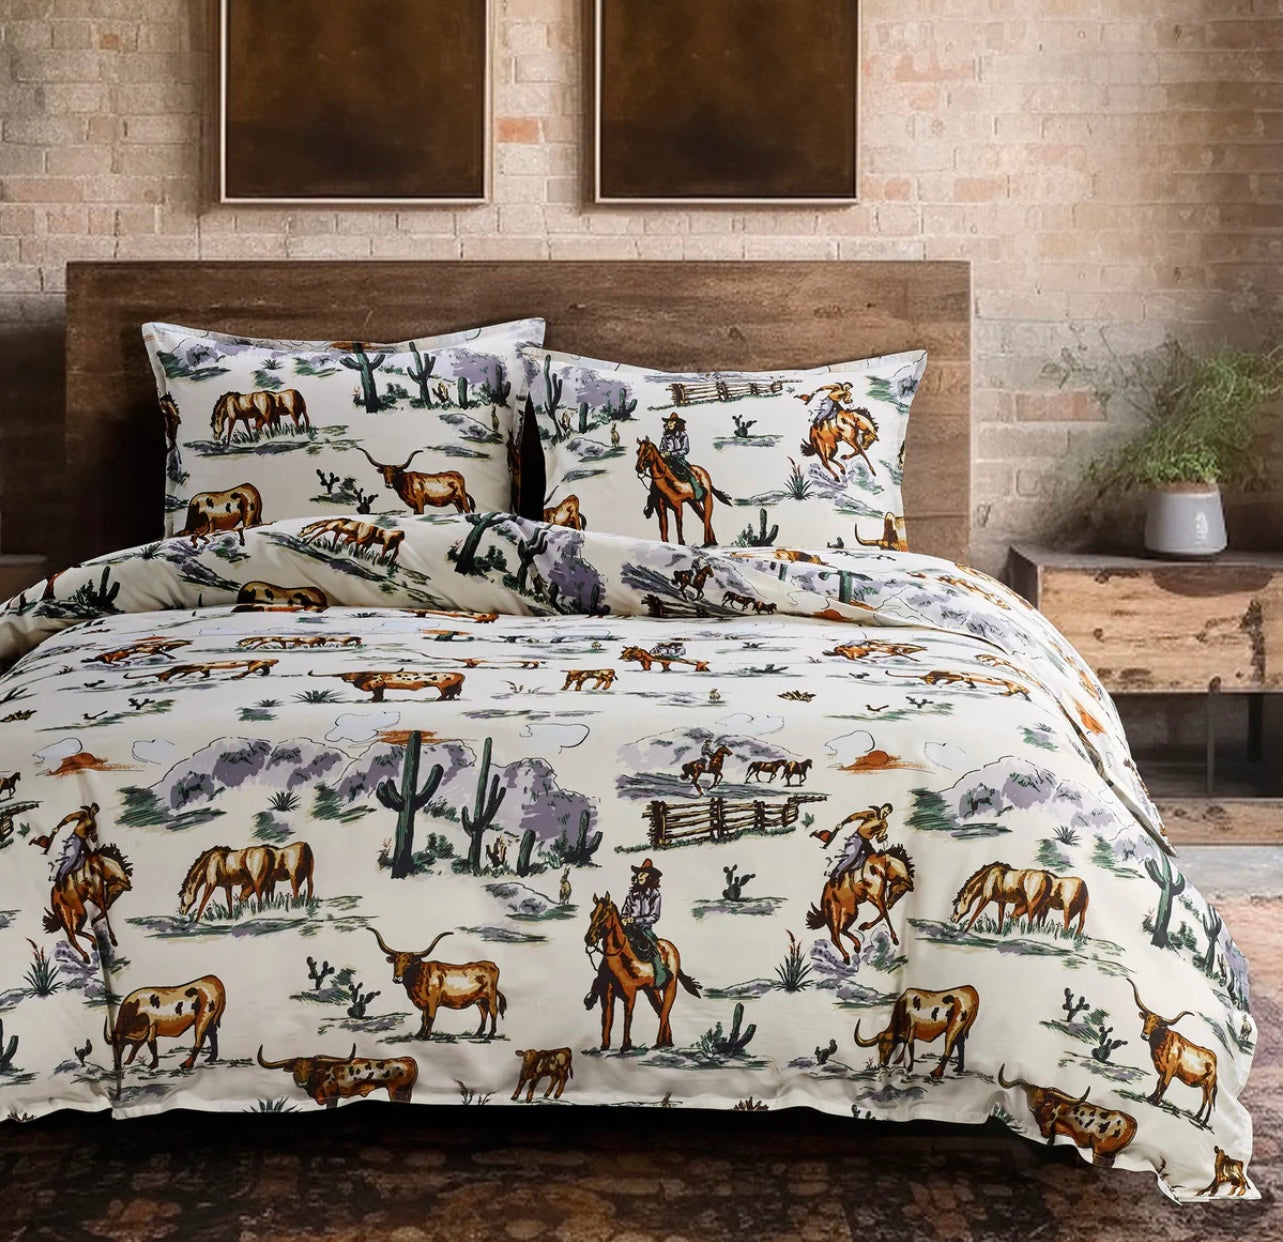 The Ranch Life Reversible Comforter Set